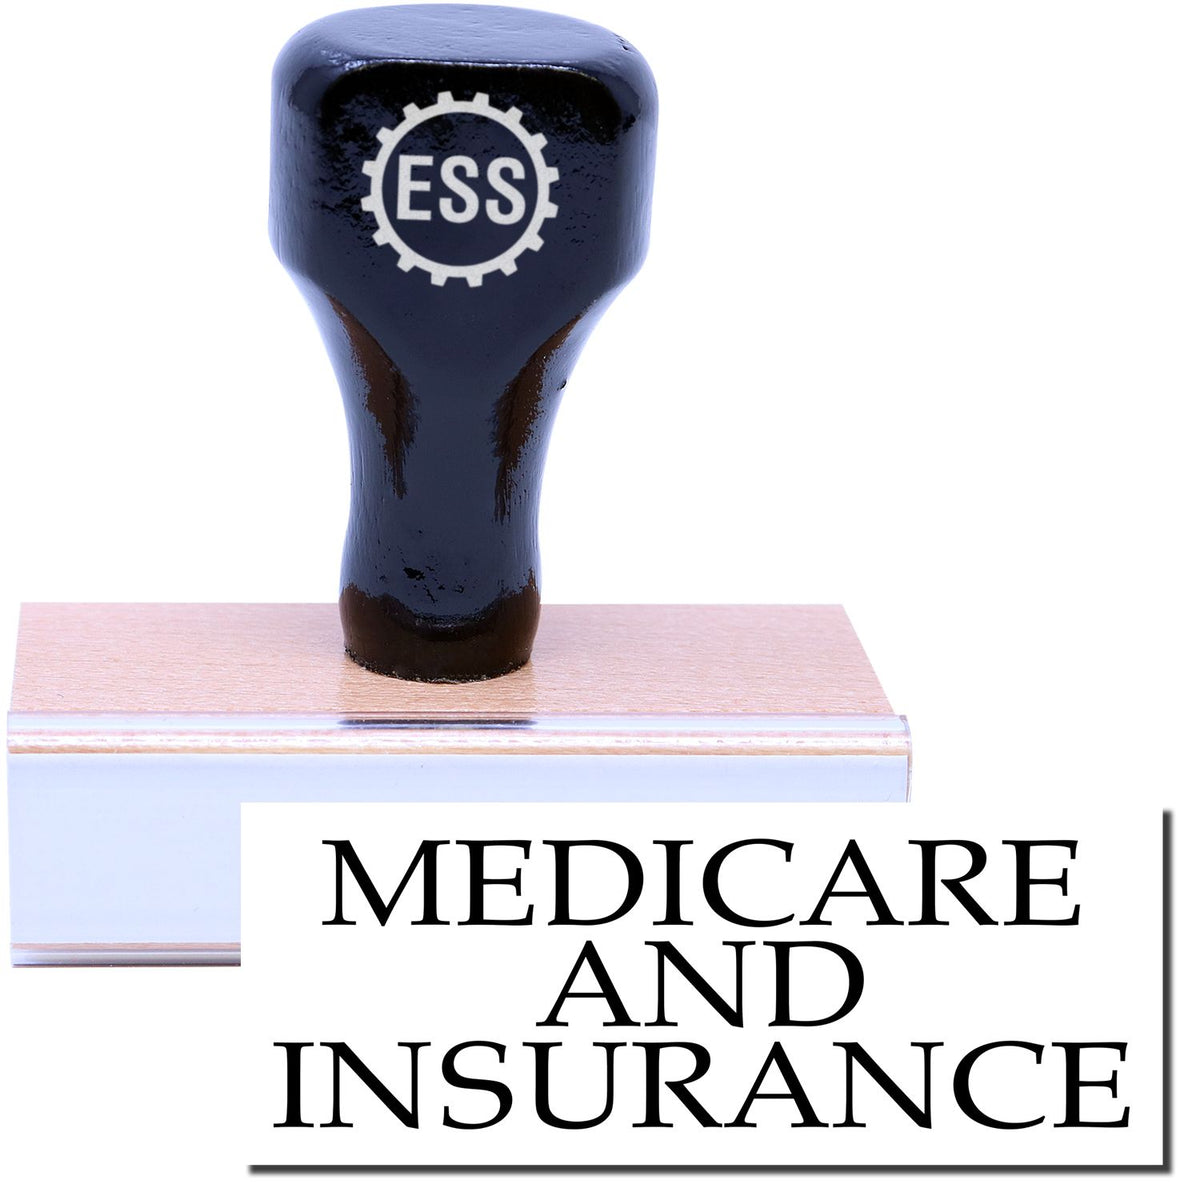 A stock office rubber stamp with a stamped image showing how the text &quot;MEDICARE AND INSURANCE&quot; is displayed after stamping.